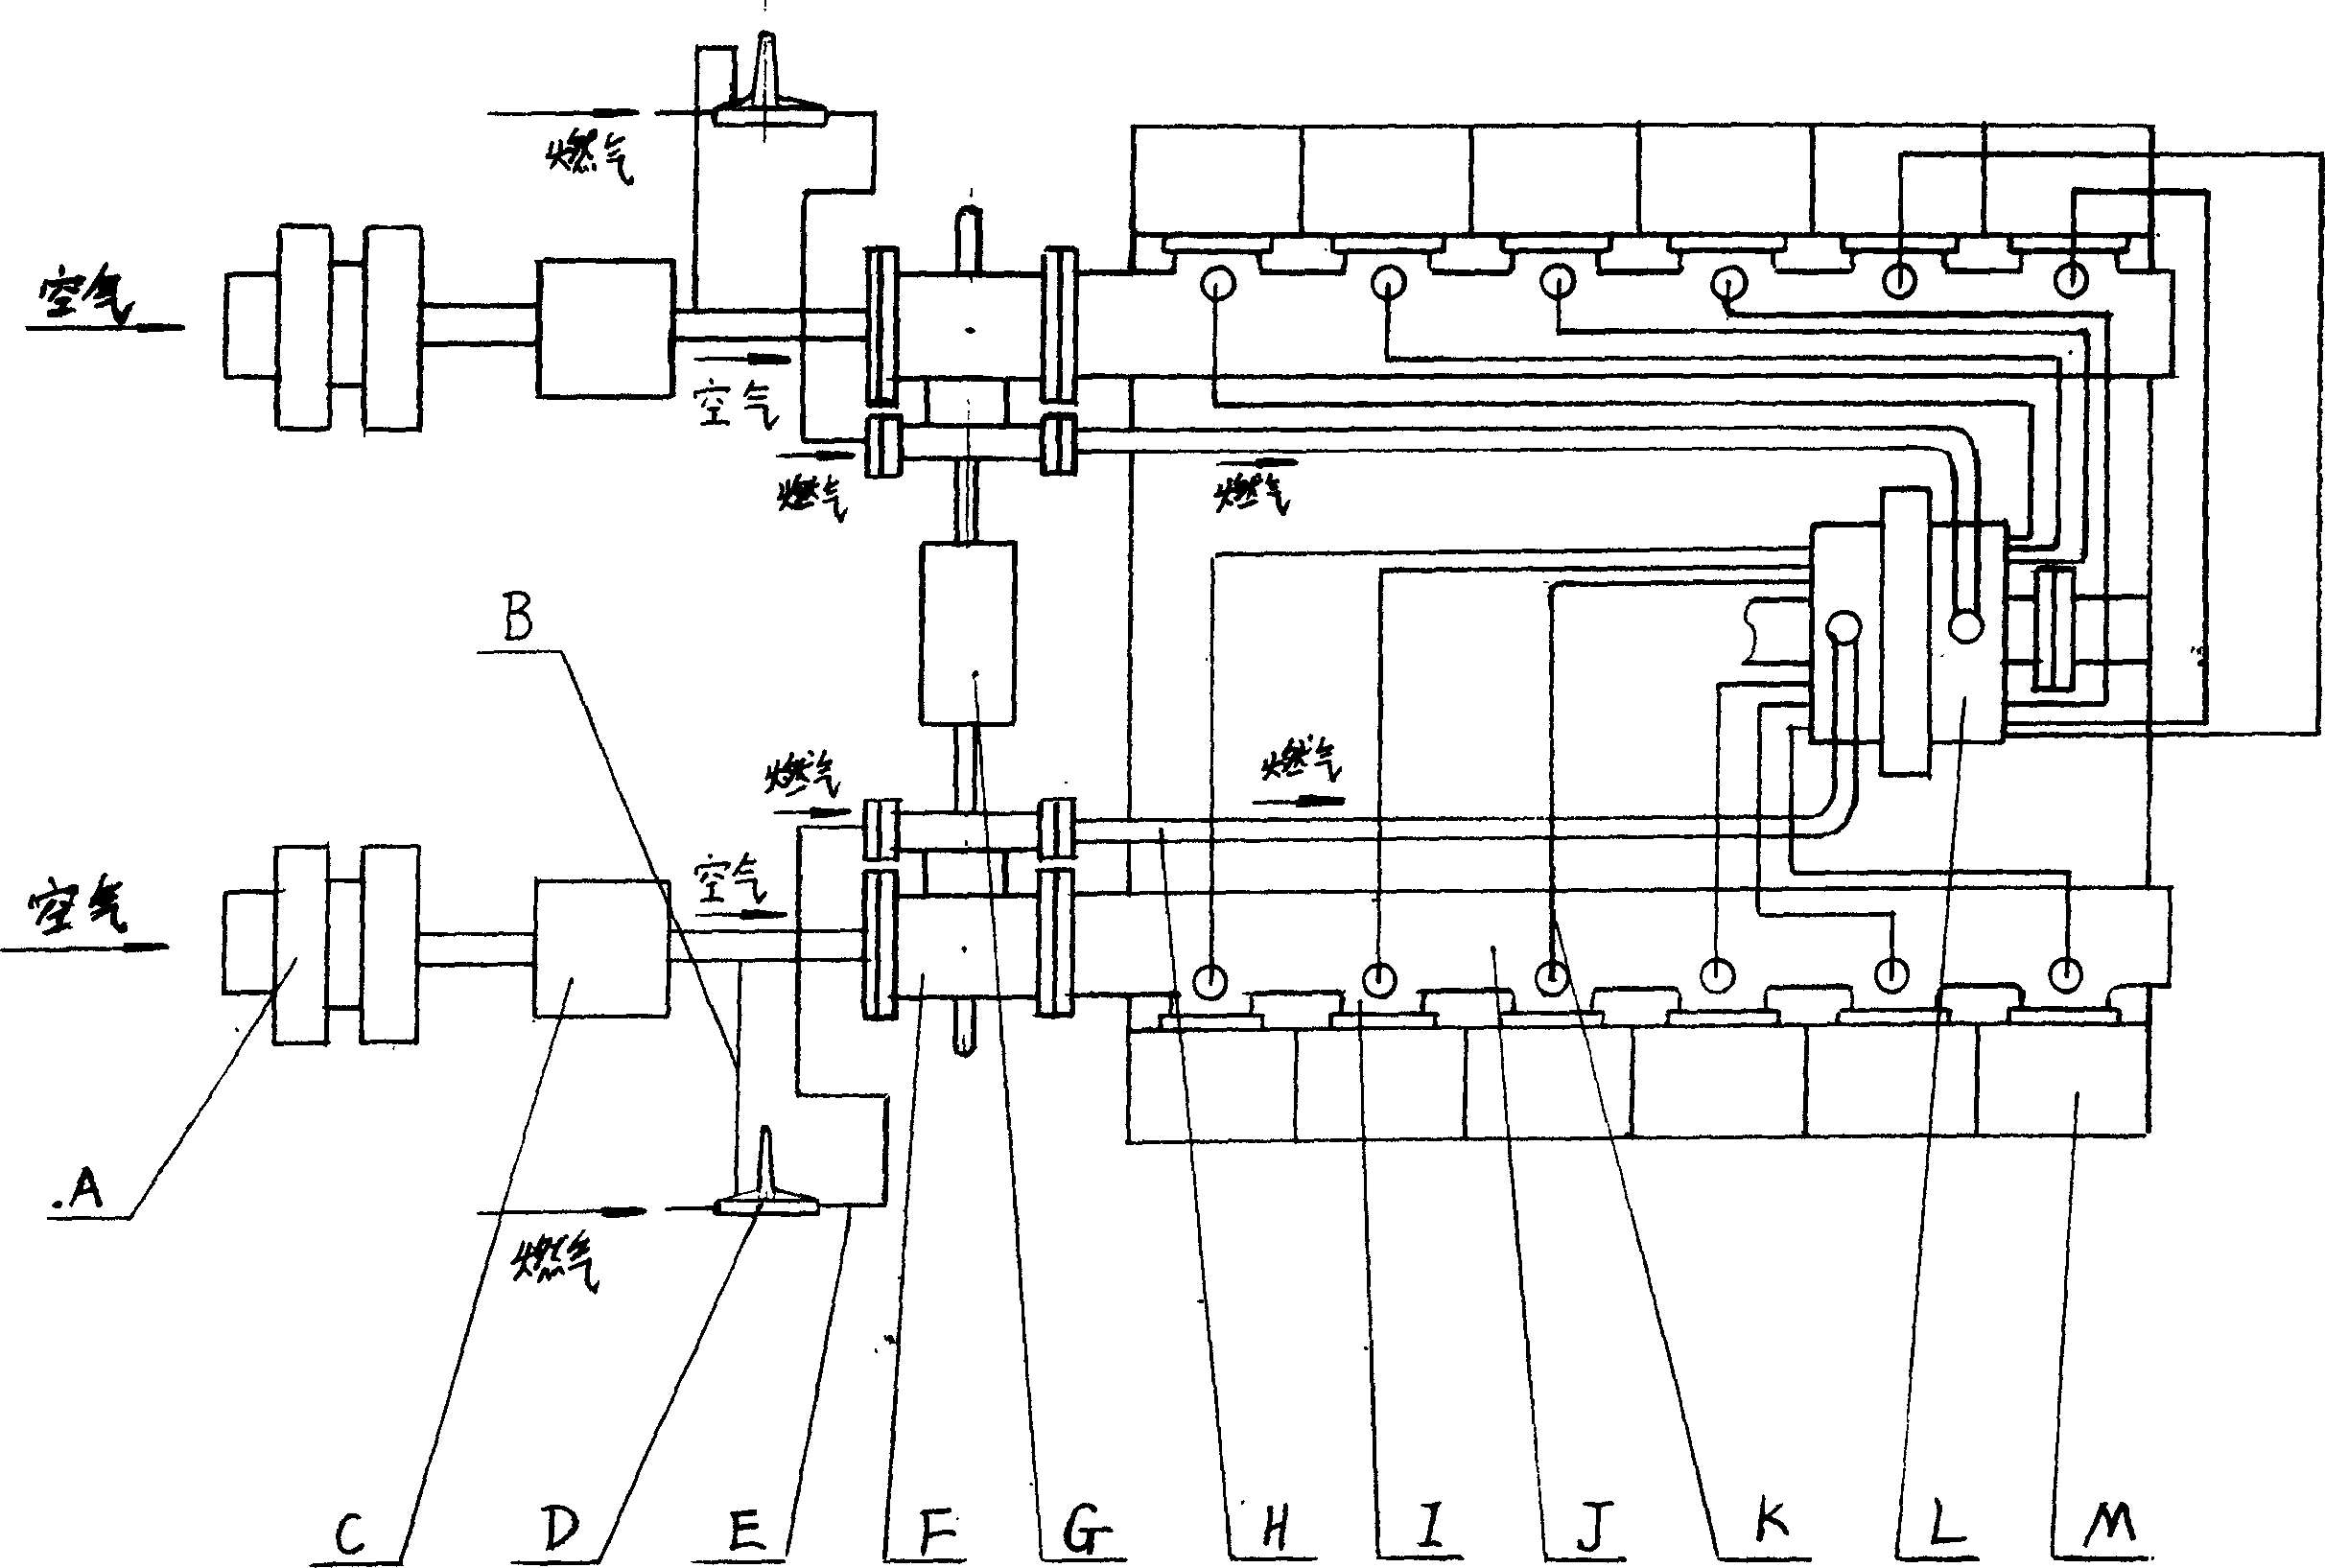 Air admission and fuel supplying system for gas engine